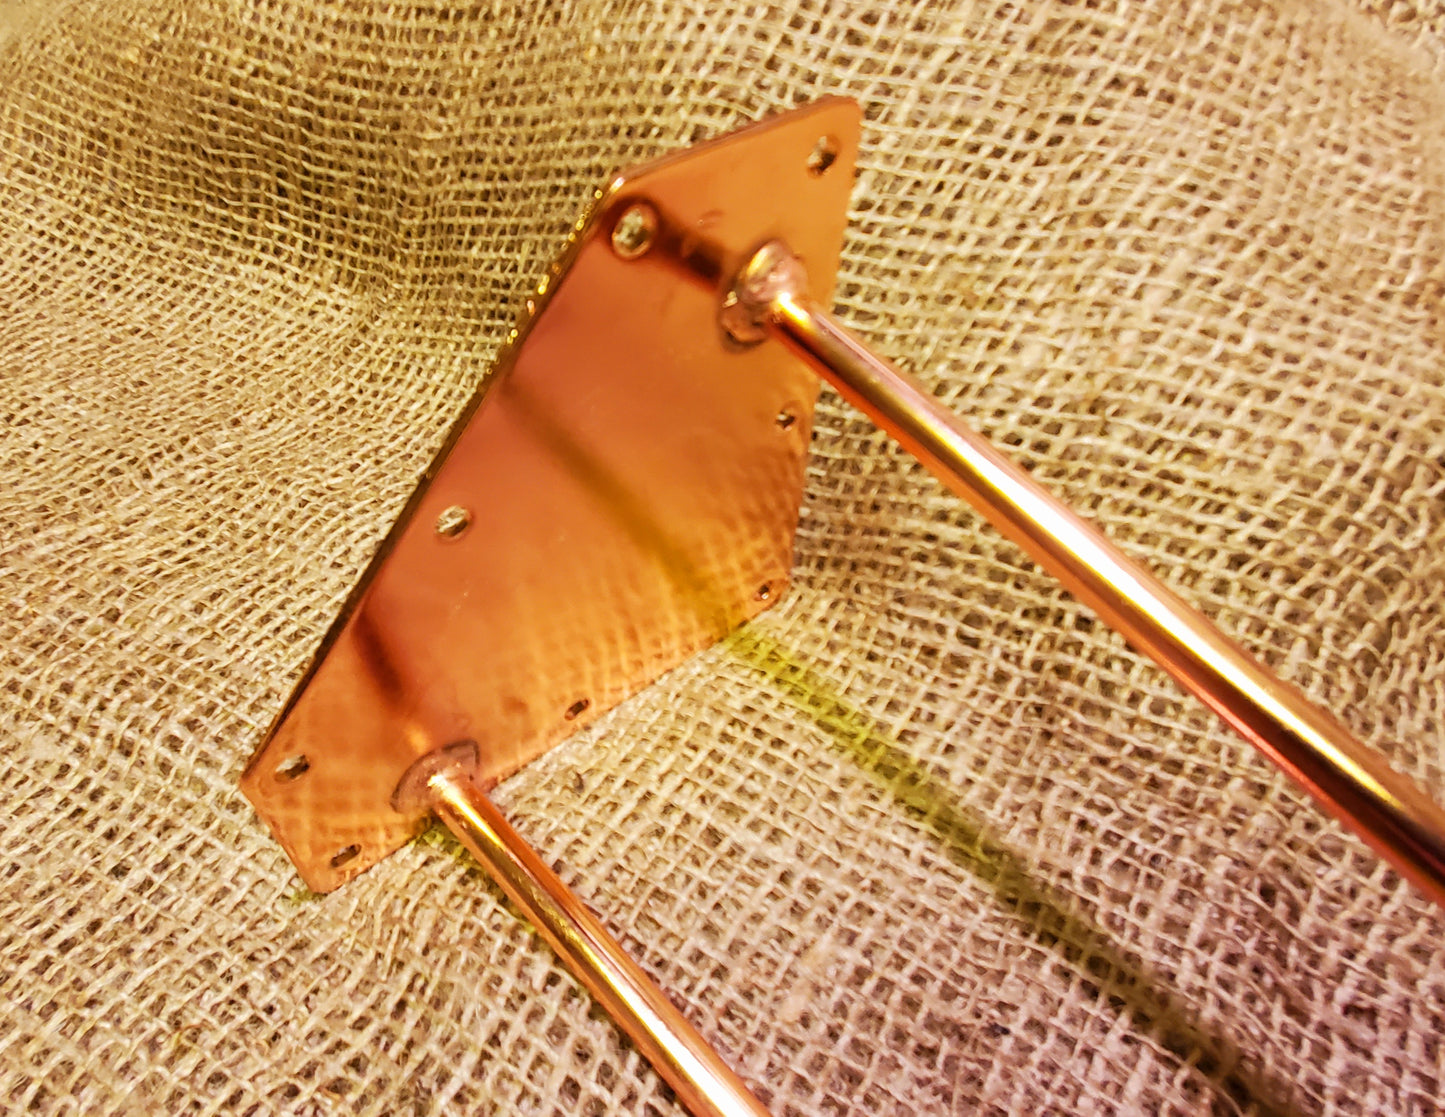 Hairpin Leg 16" Copper 3 prong - Spearhead Collection - Hairpin Legs - Copper, Hairpin Legs, Home Decor